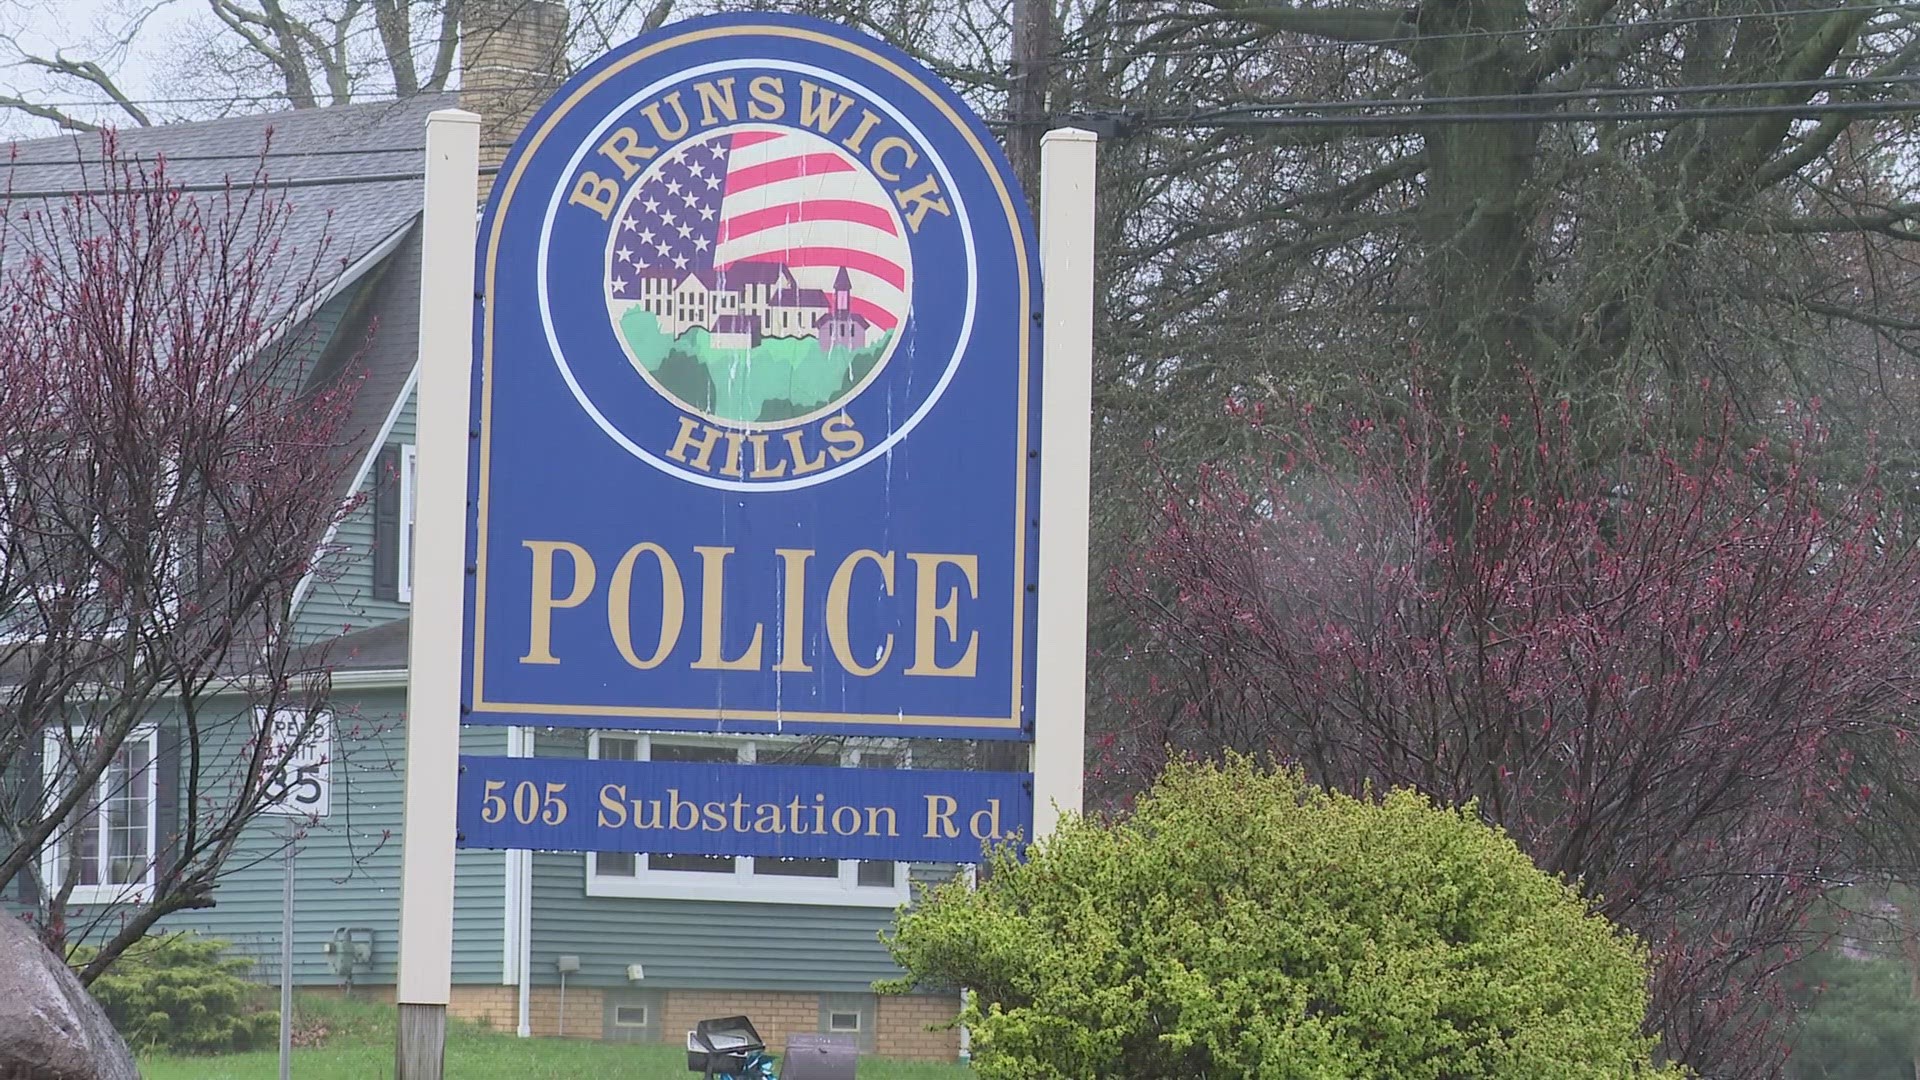 According to the Brunswick Hills police chief, the child climbed up a workbench and got ahold of an unsecured gun.